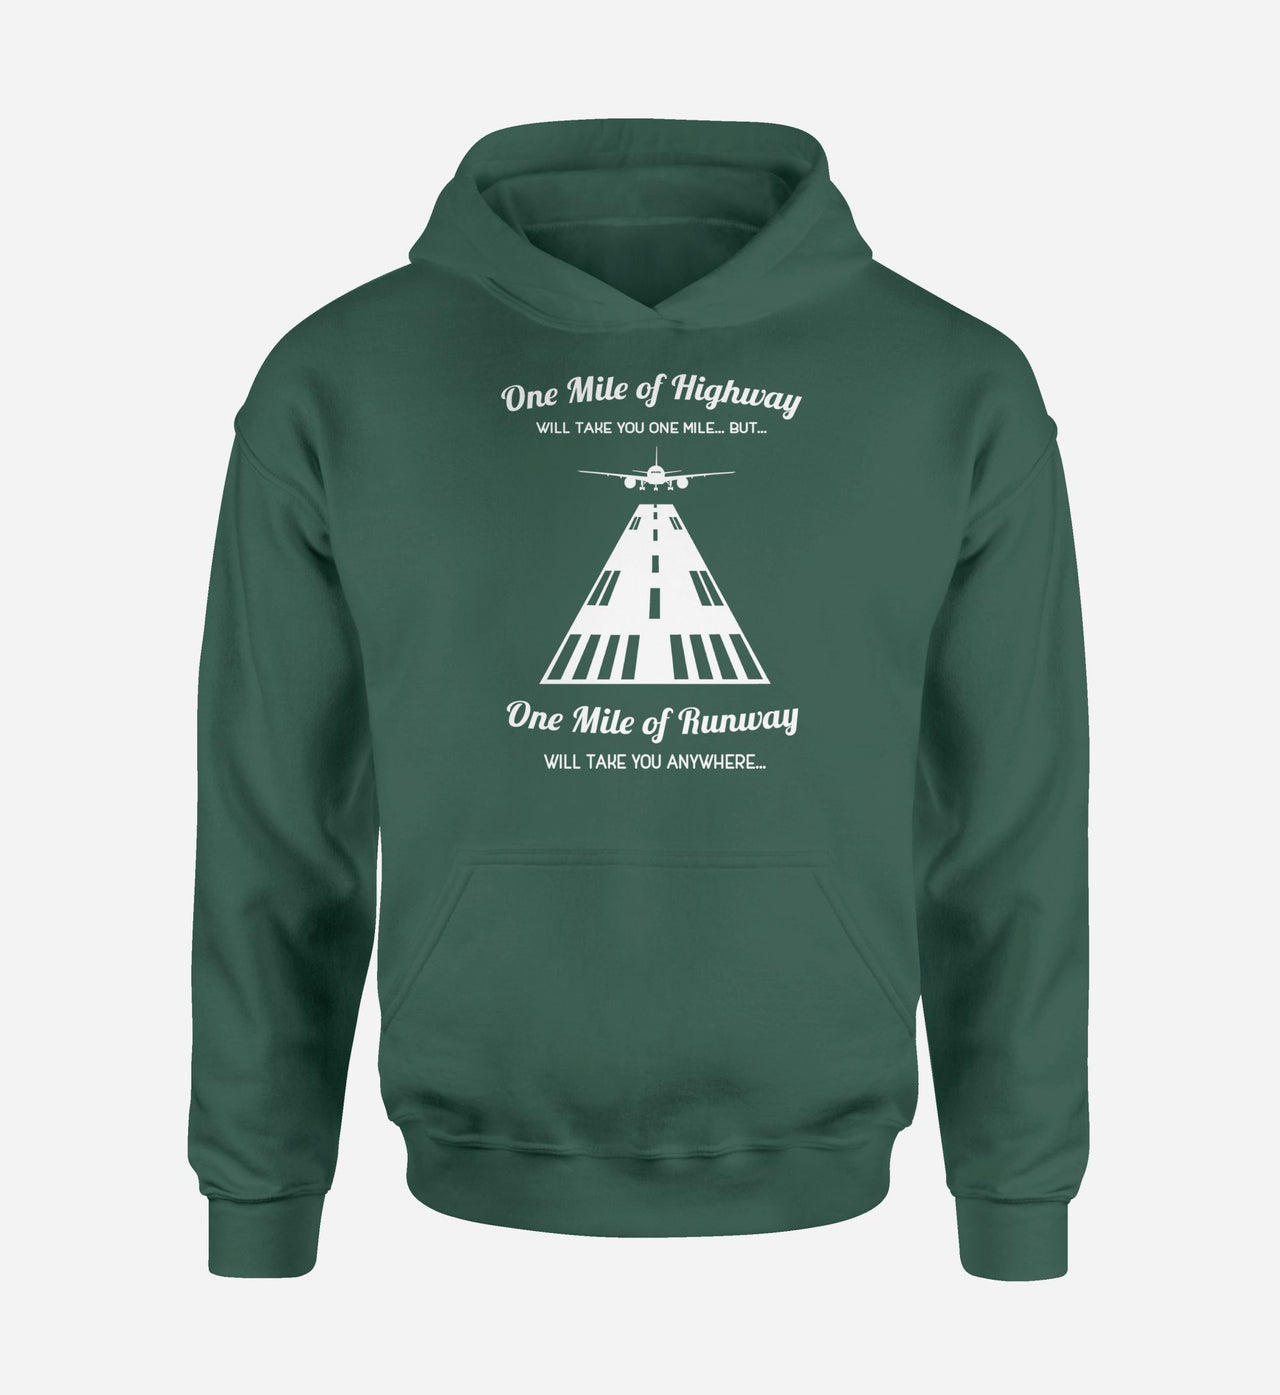 One Mile of Runway Will Take you Anywhere Designed Hoodies